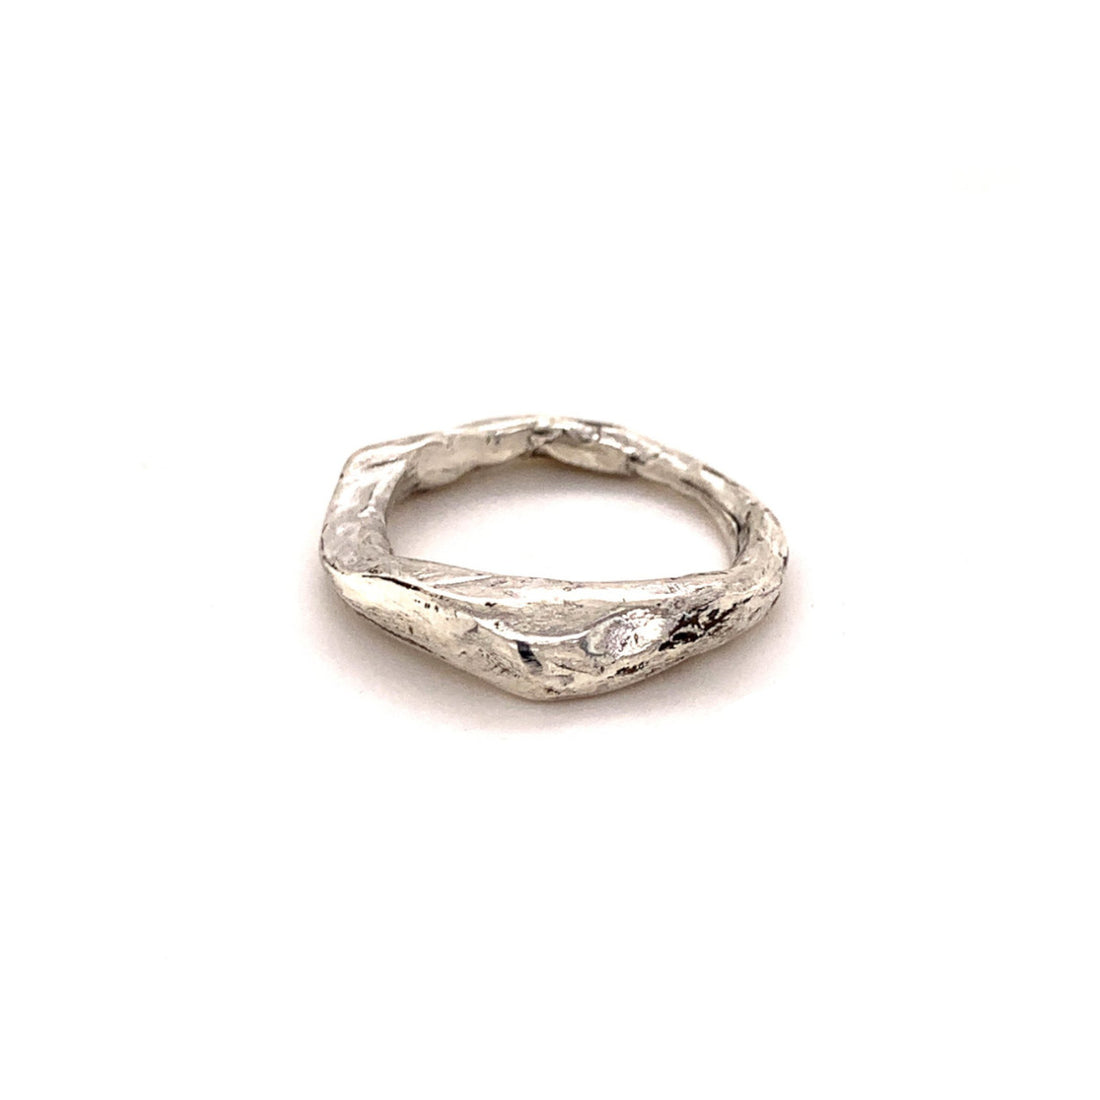 The Element Ring in Silver is designed with the art of wabi-sabi. Expressing the natural beauty you have within. It's not only beautiful to look at, but serves as a reminder to experience the beauty and power of nature in your daily life. 